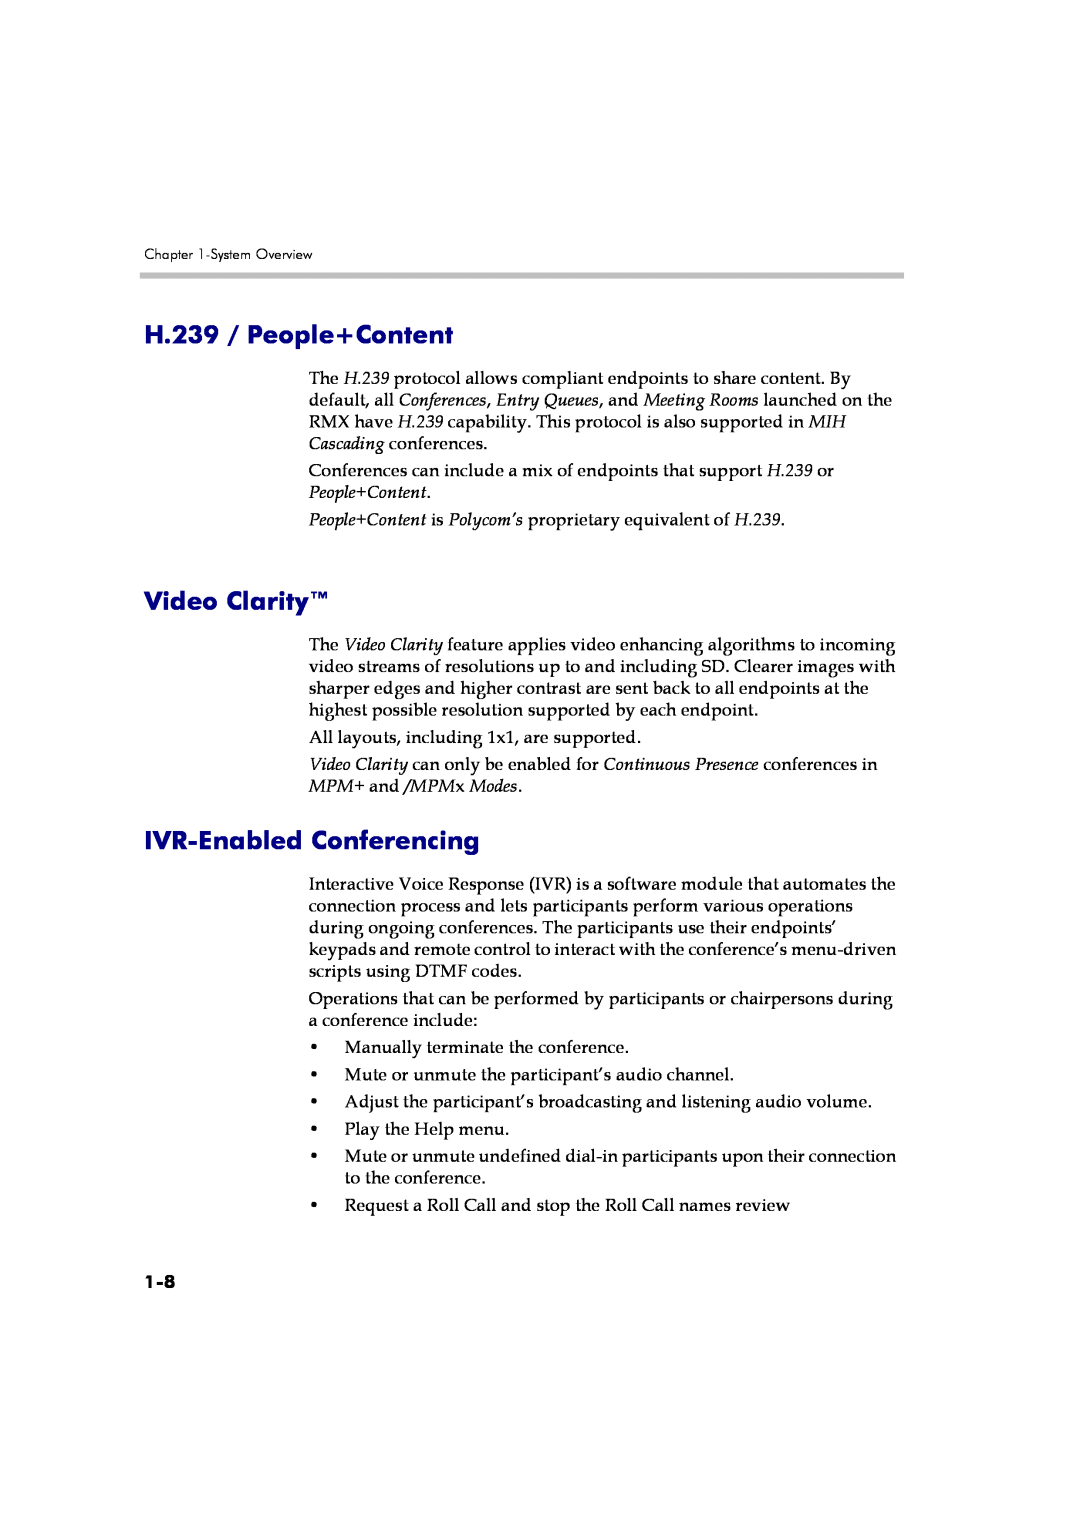 Polycom DOC2560B manual H.239 / People+Content, Video Clarity, IVR-Enabled Conferencing 